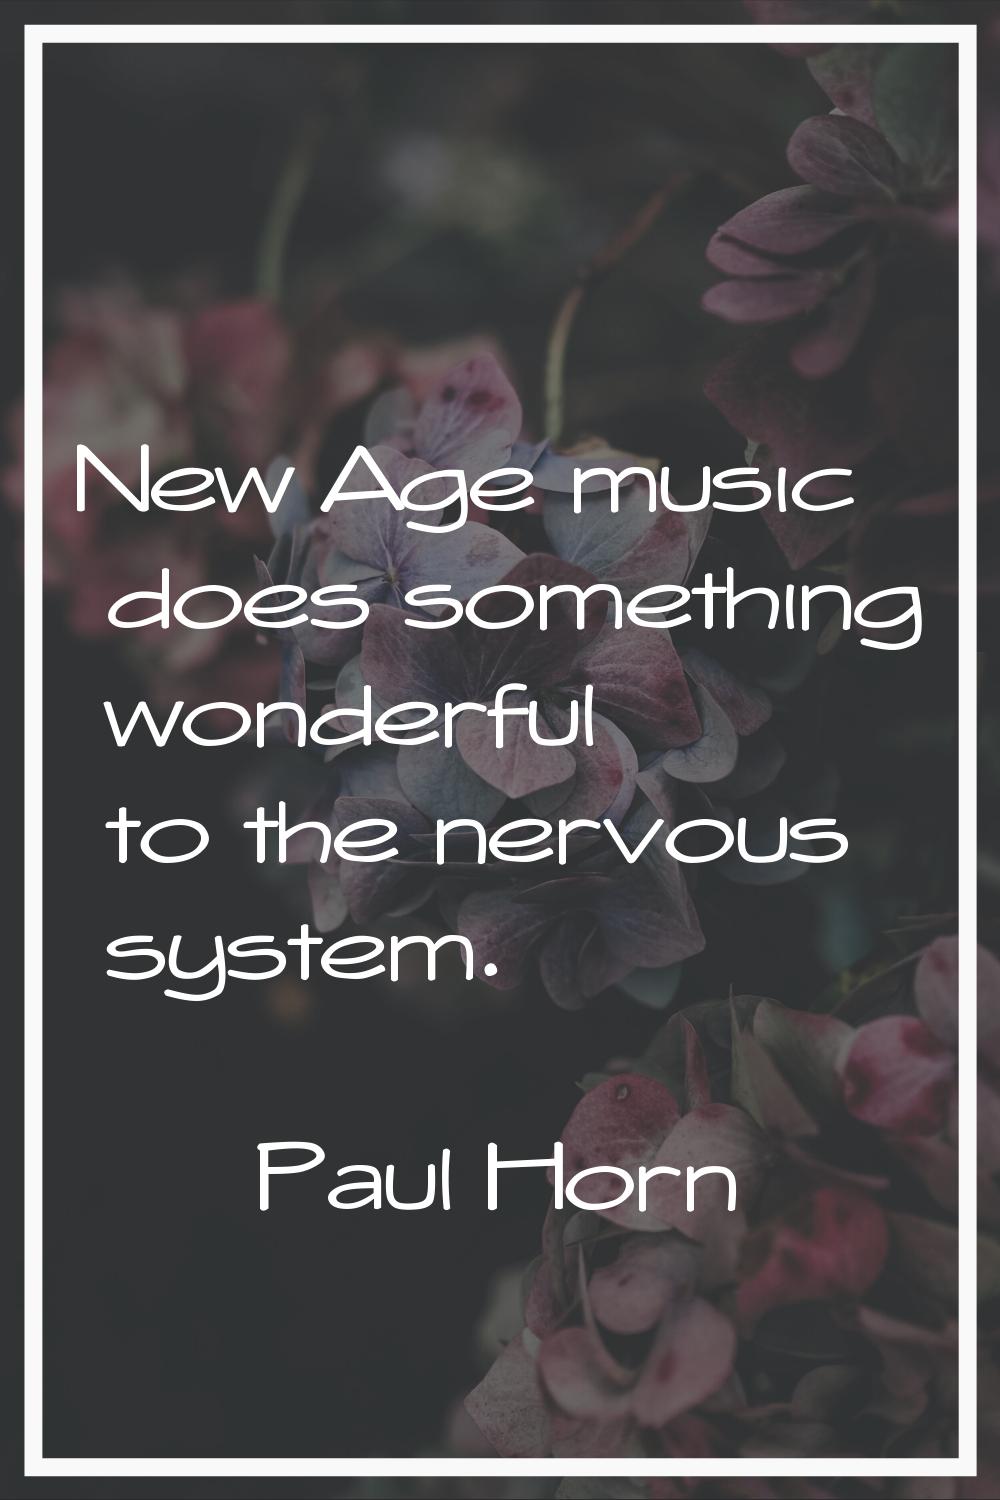 New Age music does something wonderful to the nervous system.